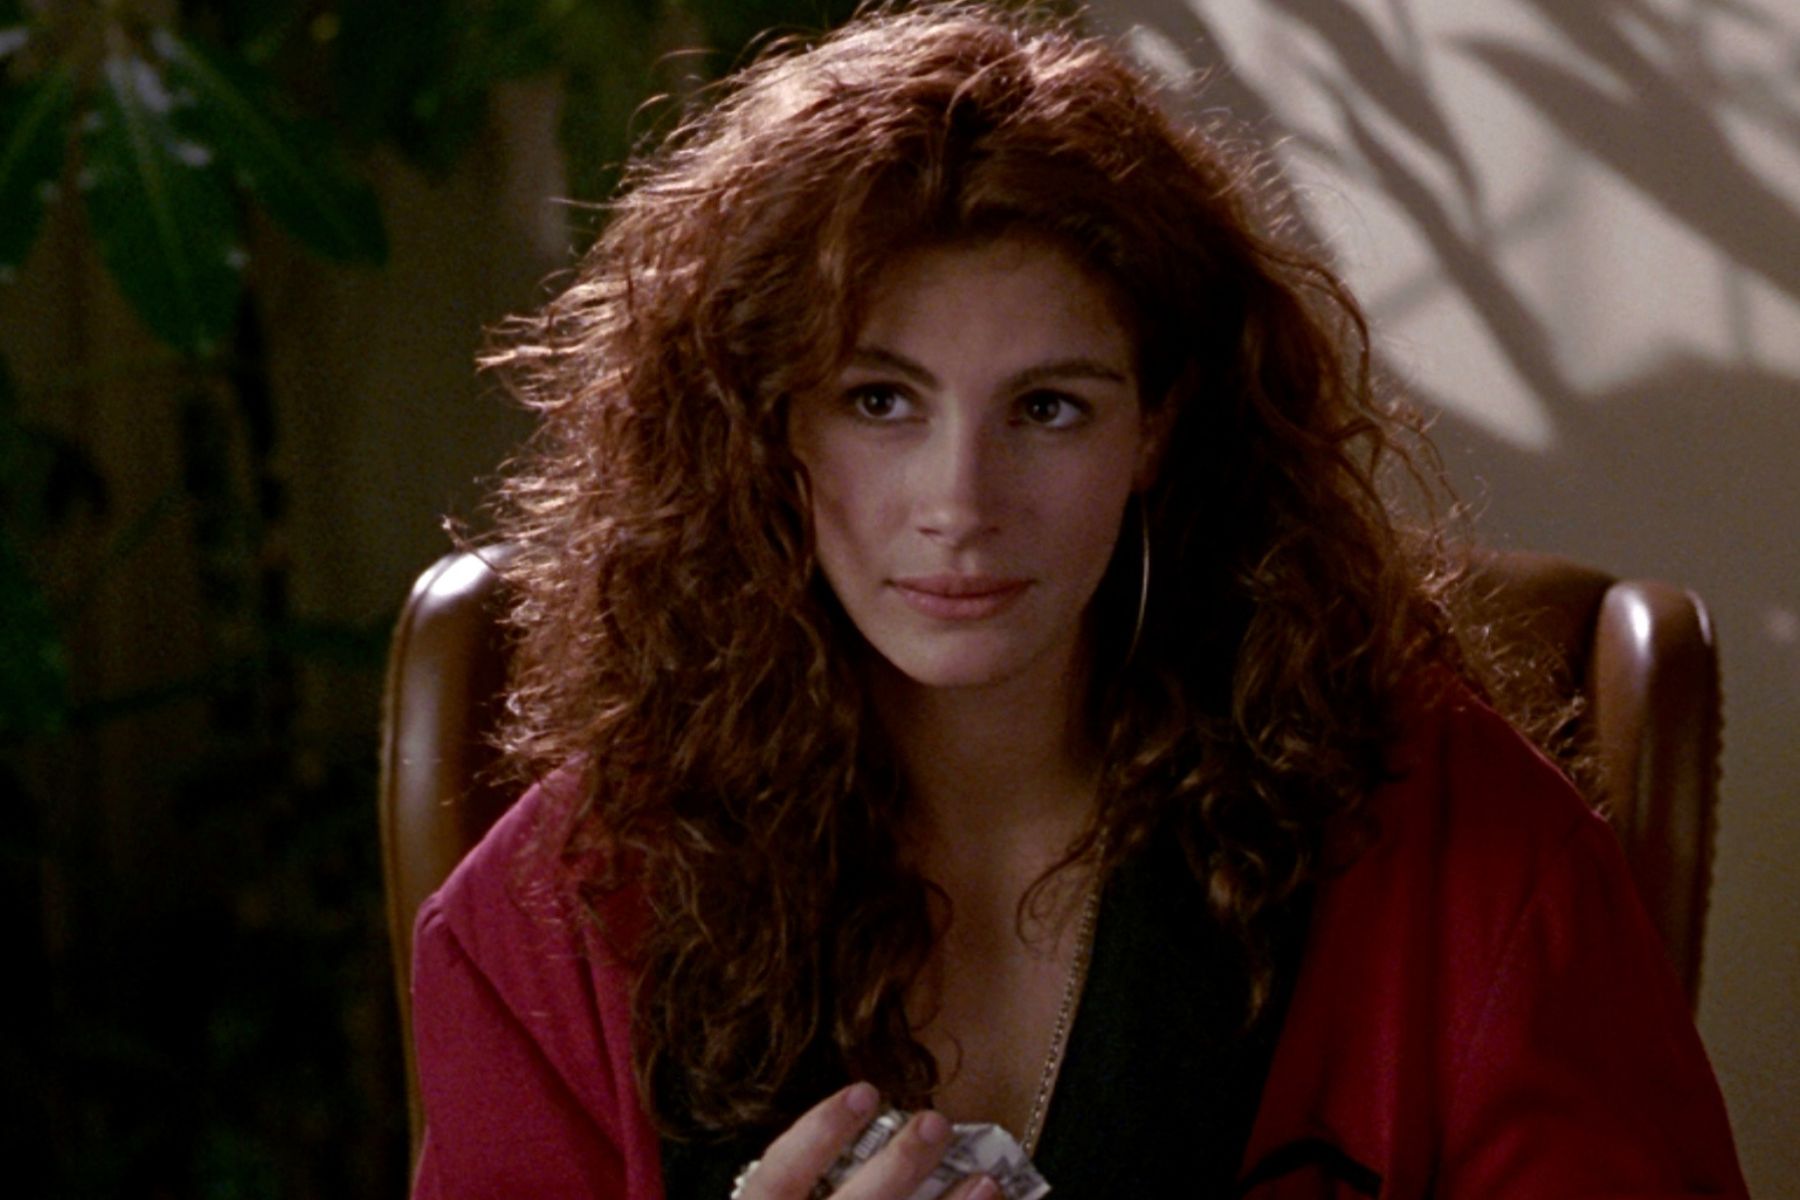 <p>In <em>Pretty Woman, </em>an escort (Julia Roberts) and a wealthy businessman (Richard Gere) fall for each other, forming an extraordinary couple. In the original ending, Gere dumps Roberts back onto the street; fans did not like this, so the directors decided to tweak it so they stayed together, and the movie became a love story. Some fans wish they had kept the original ending, as it would have been more realistic.</p>